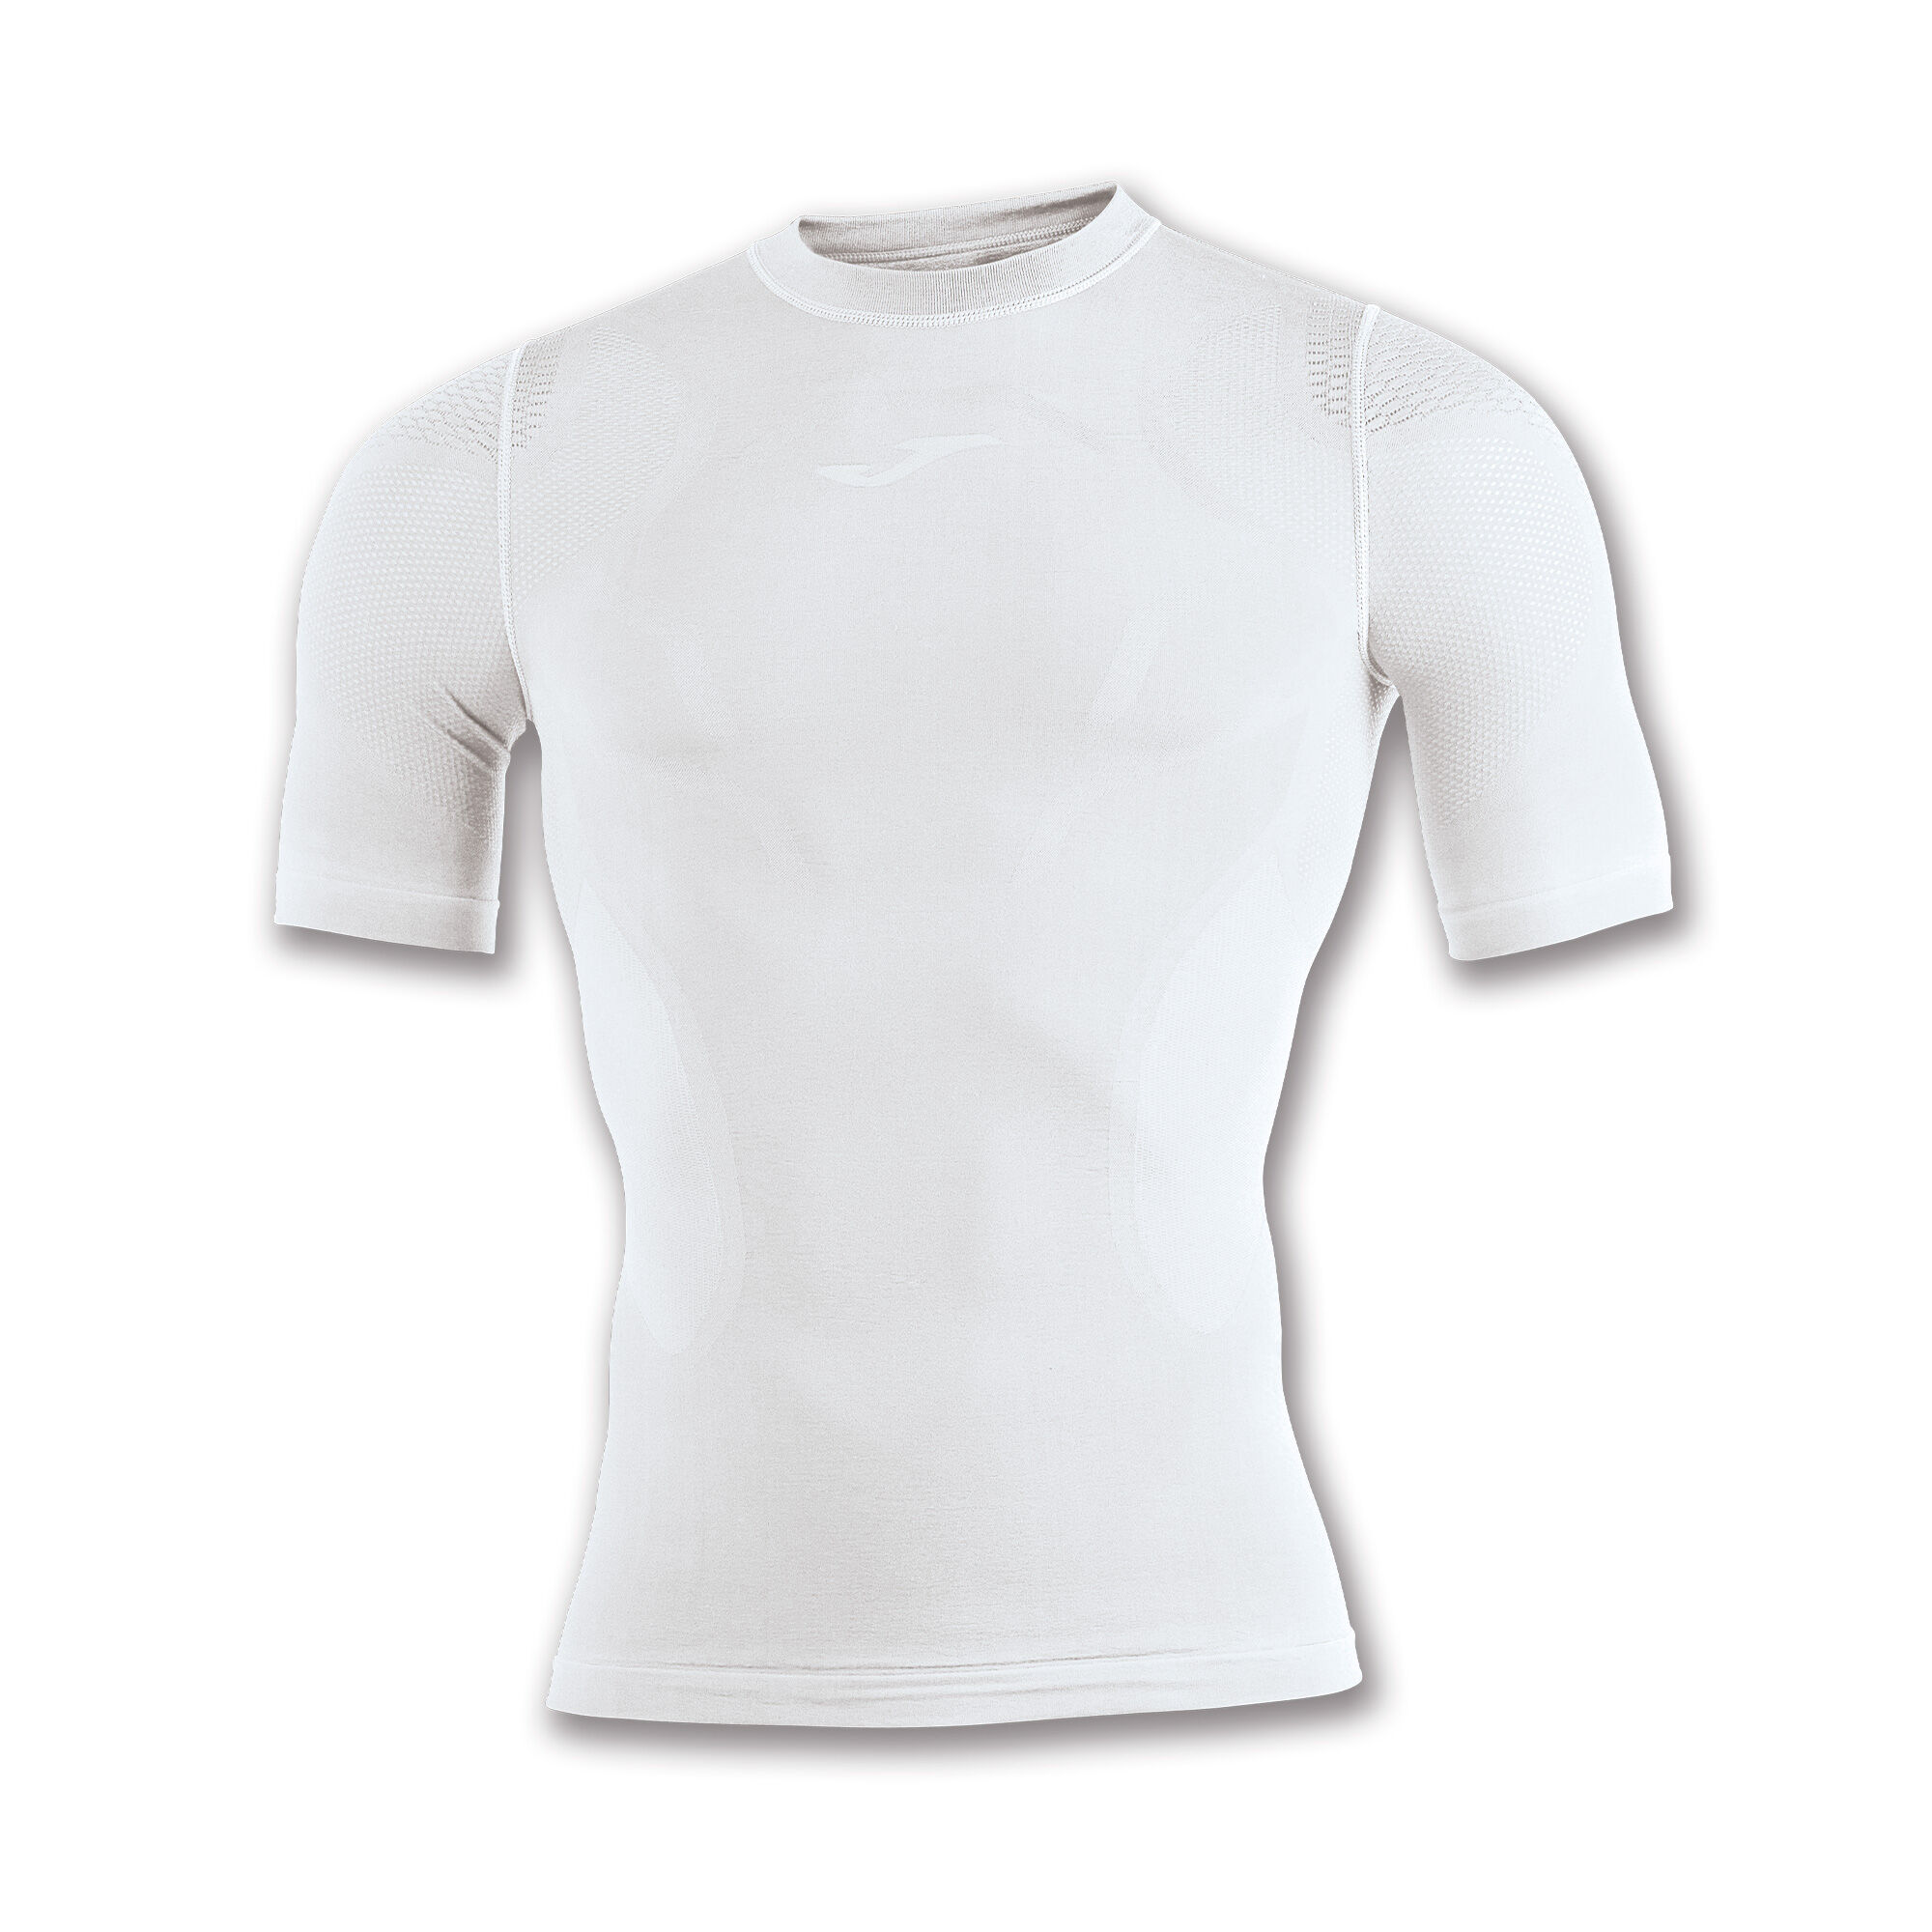 MAILLOT MANCHES COURTES HOMME BRAMA EMOTION II BLANC